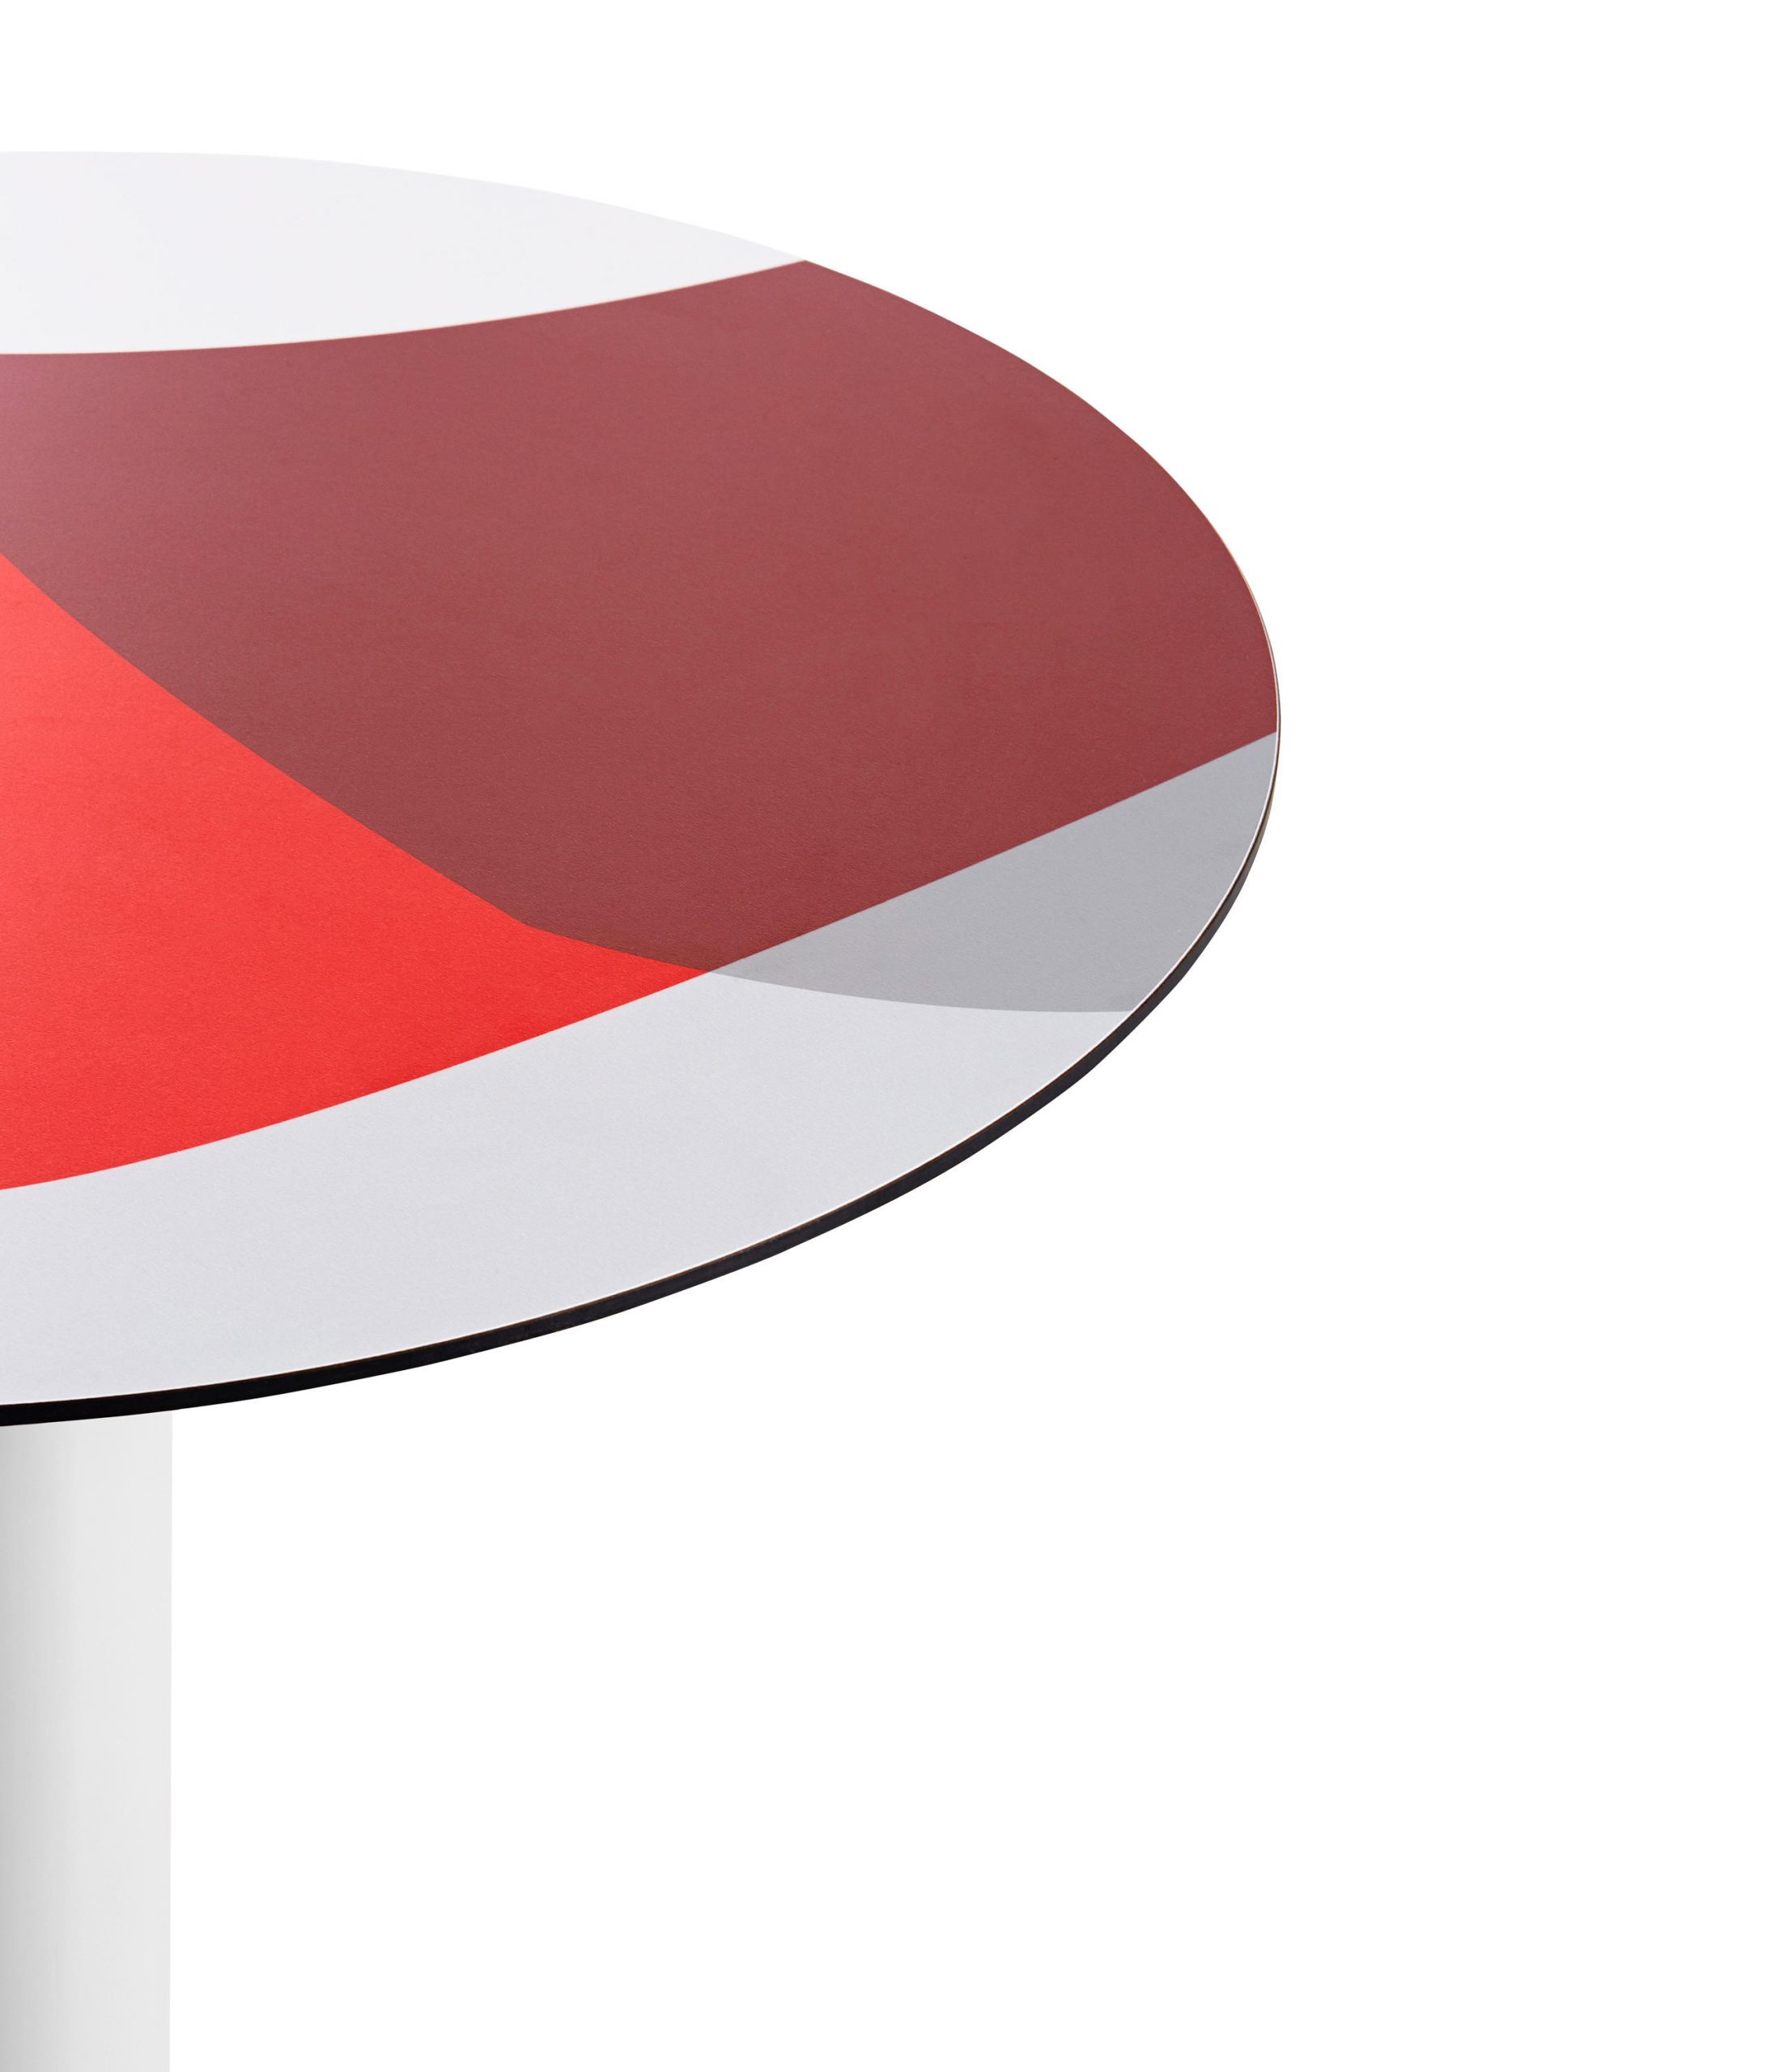 Abstrakt Mona Tables by Jonathan Lawes for Diabla